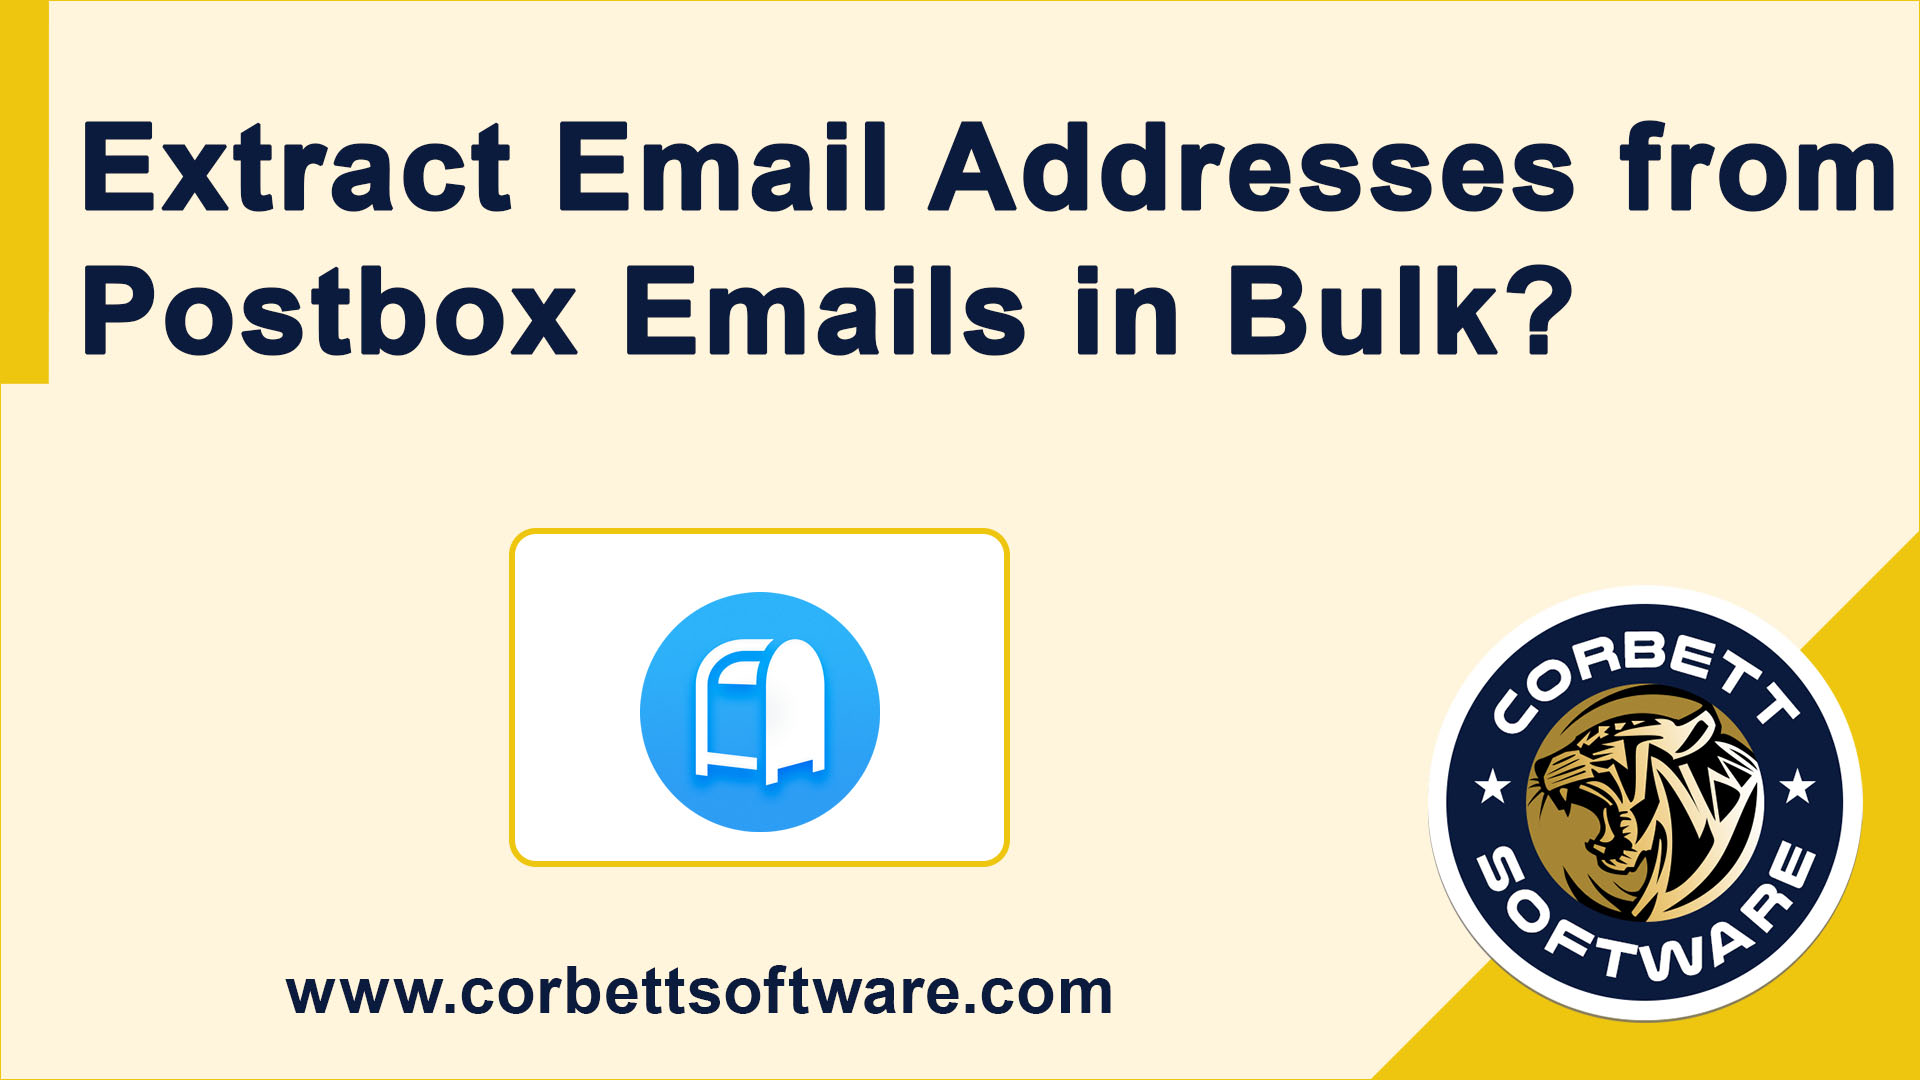 Extract Email Addresses from Postbox